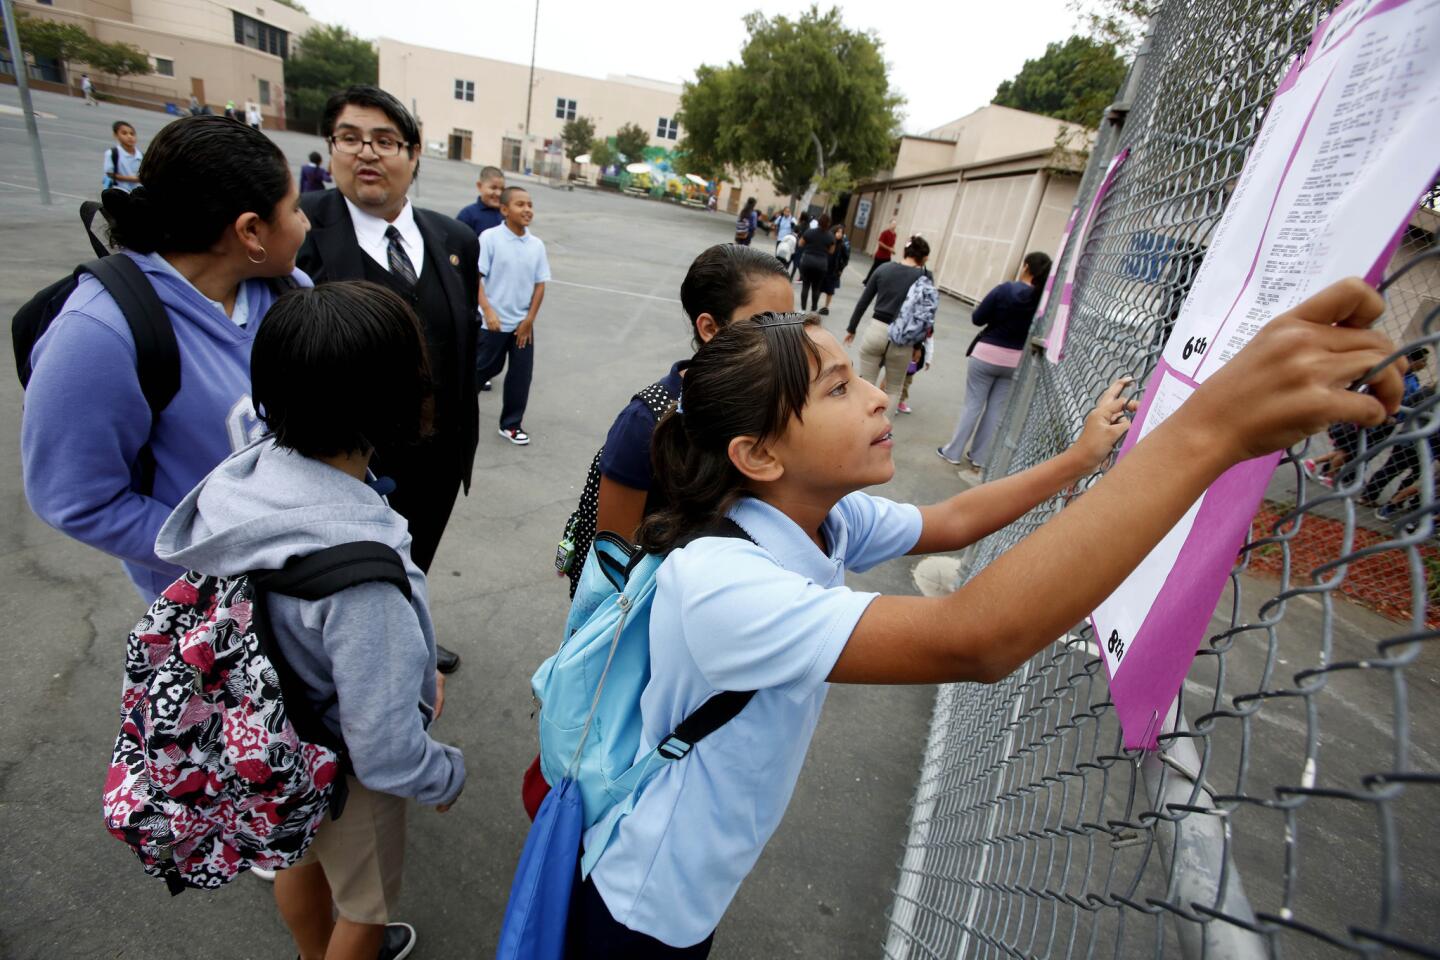 Seventh-grader Jessica Serrano checks for her class at Utah Street School in Boyle Heights.